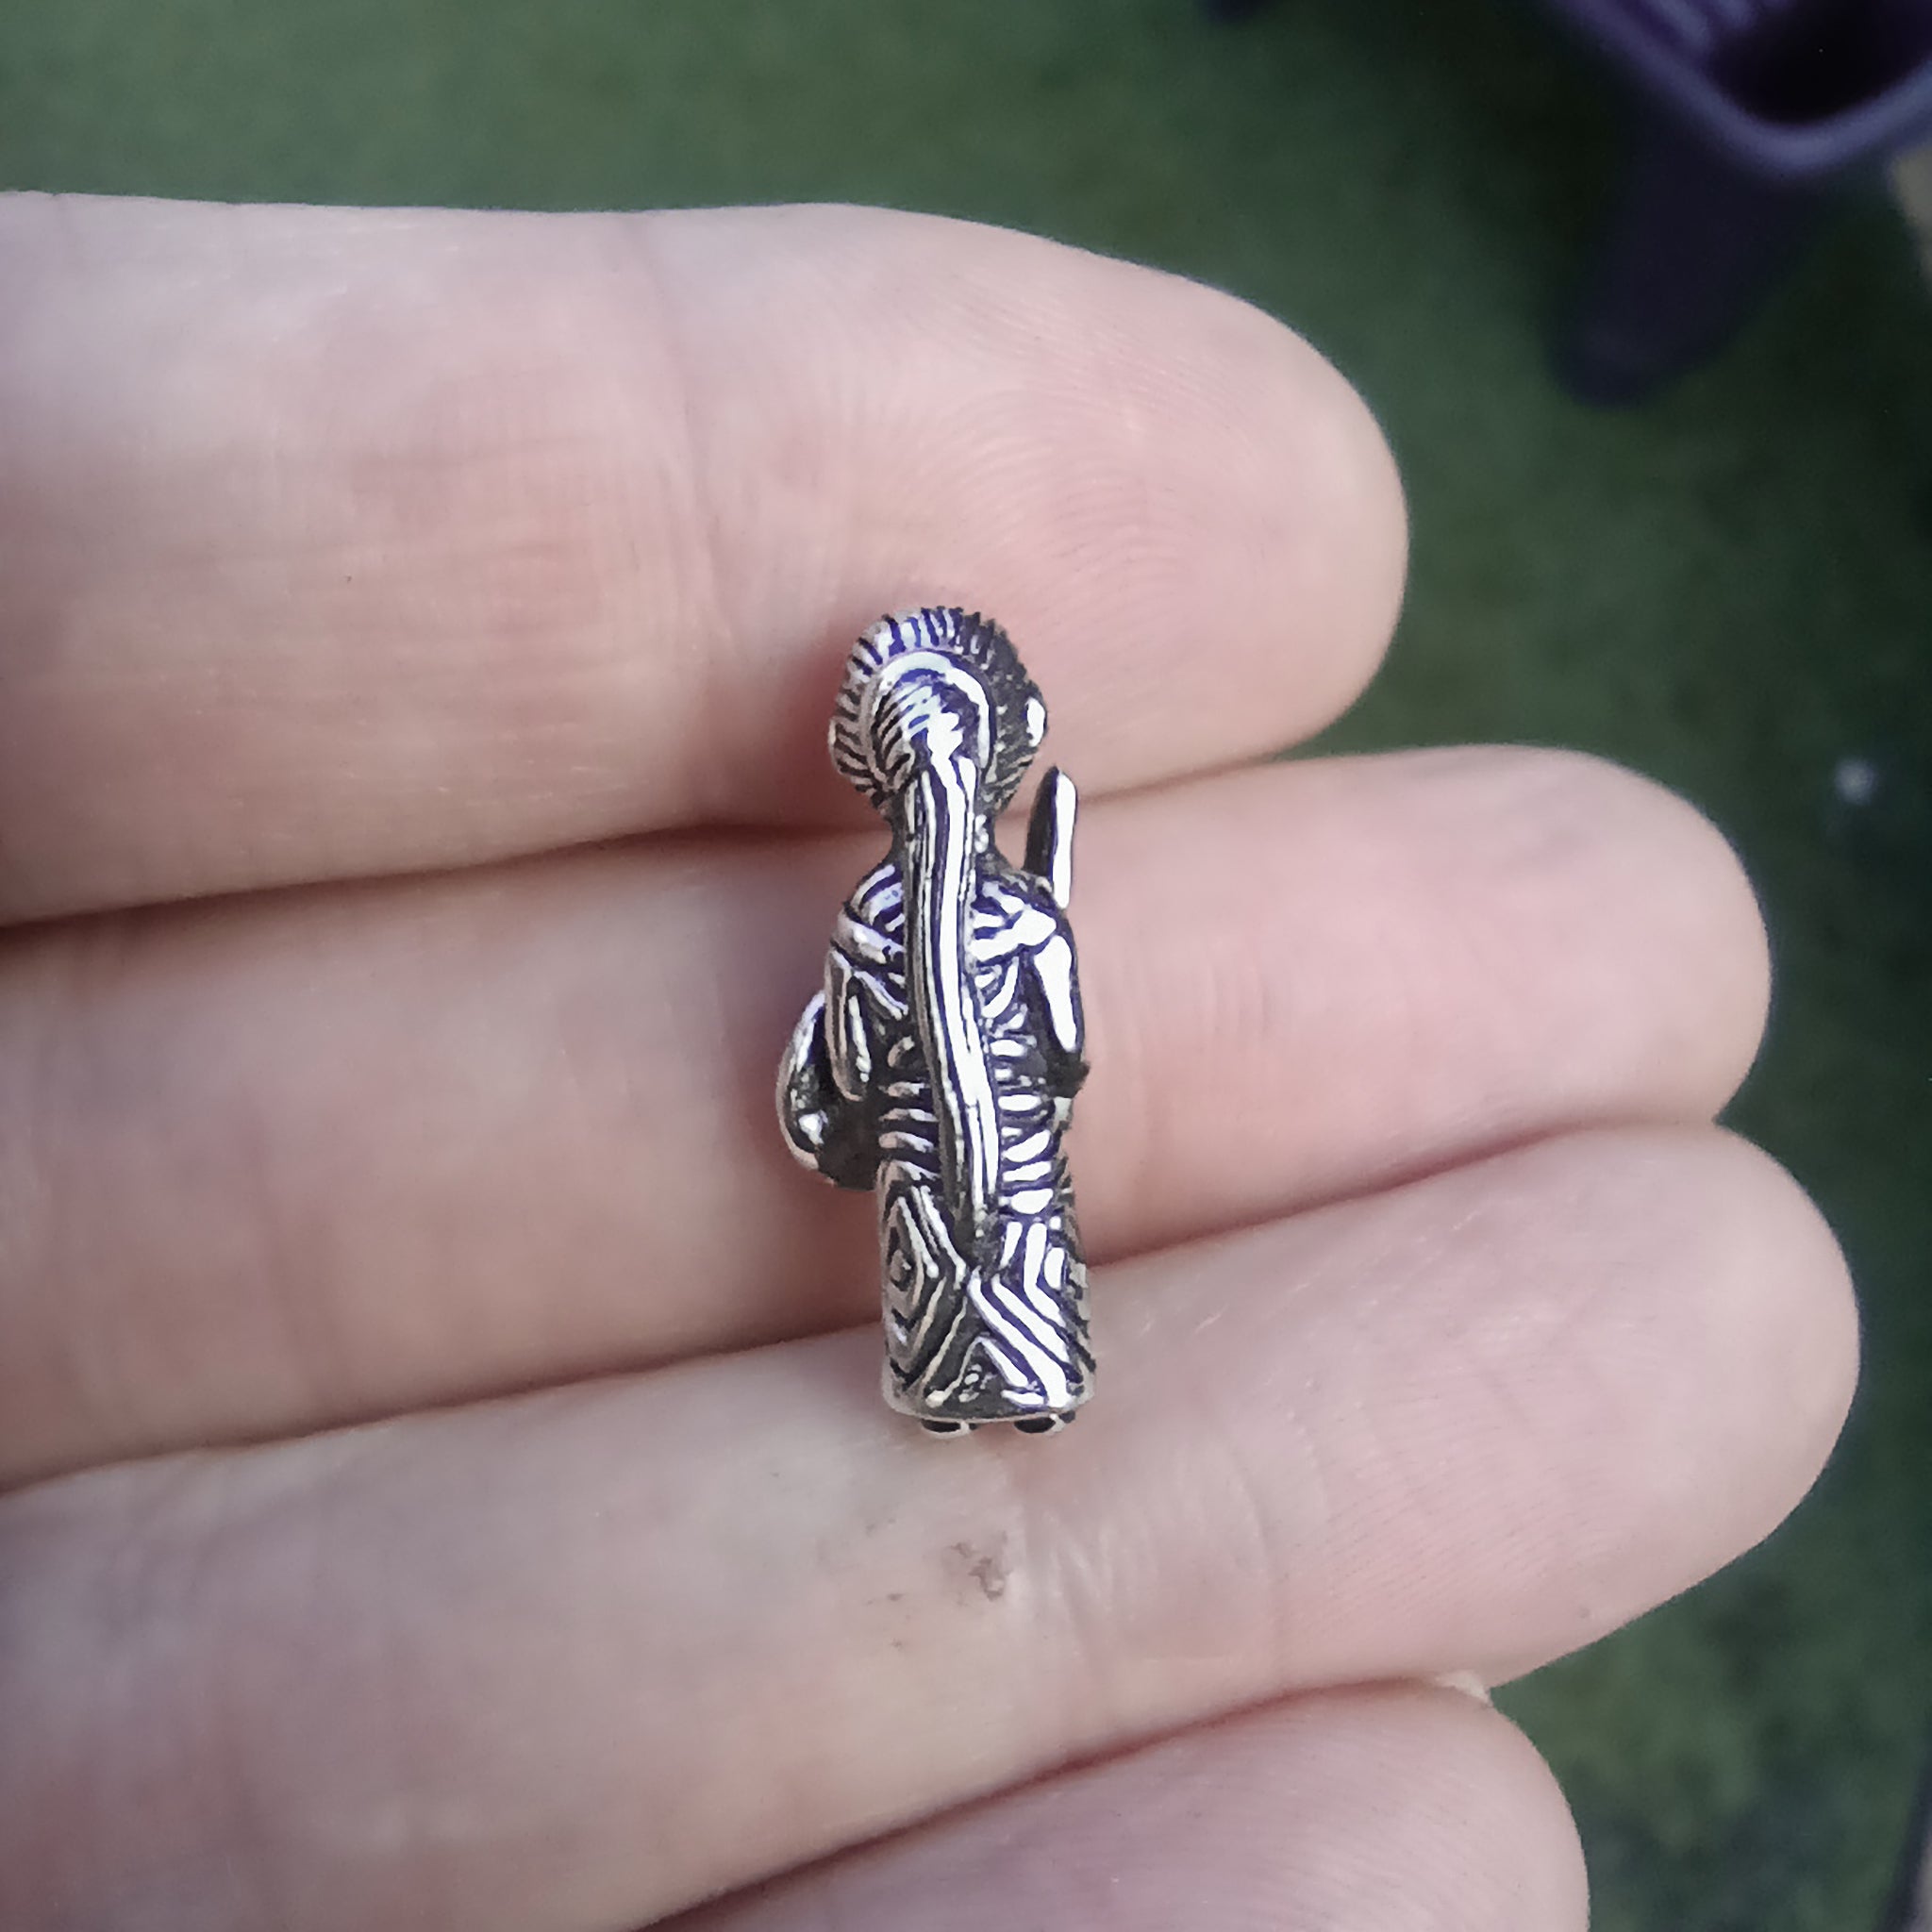 Small Silver Valkyrie Pendant on Hand - Back View